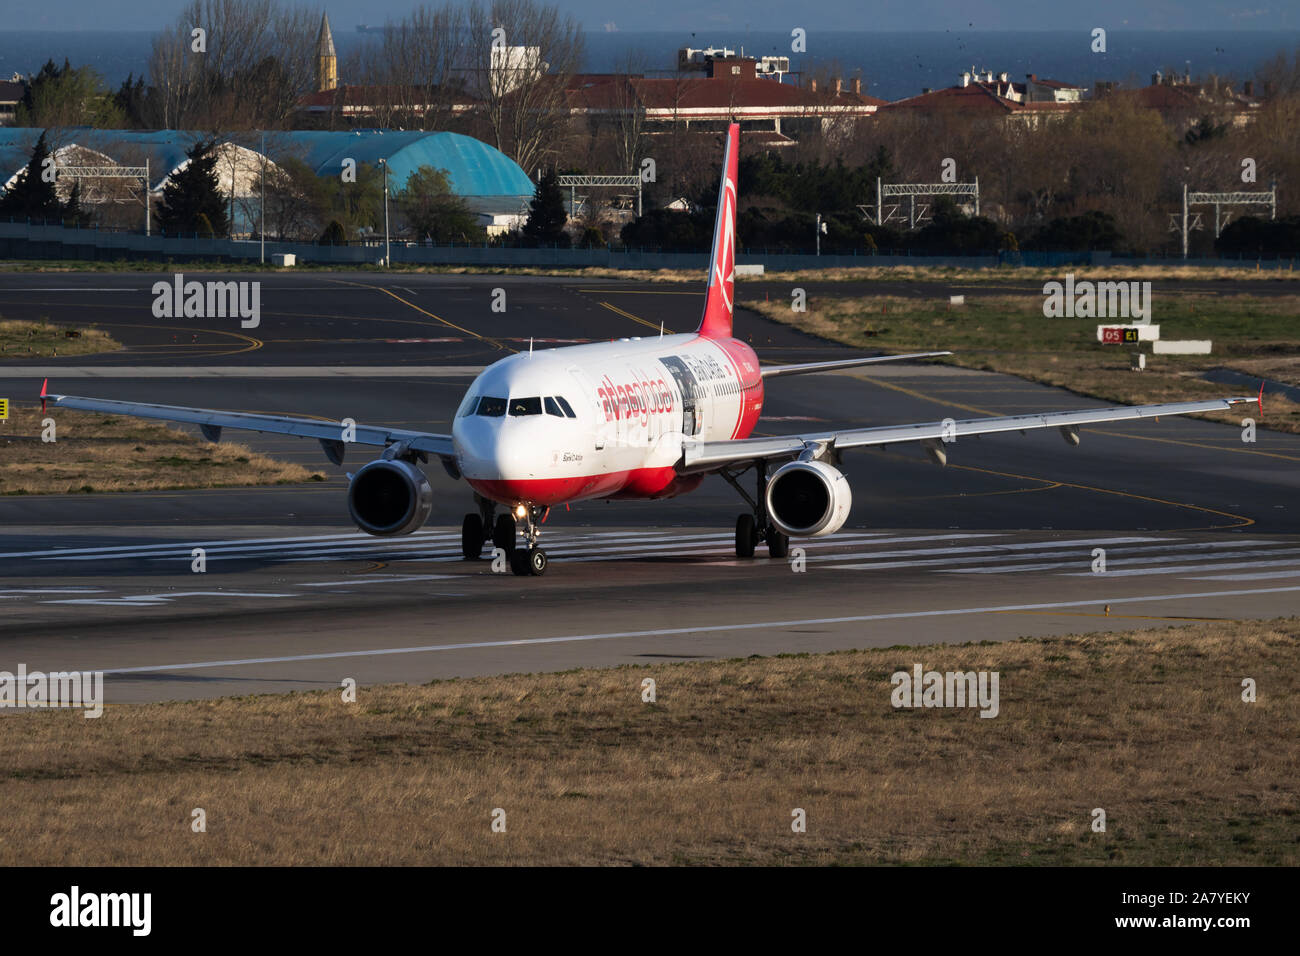 Istanbul / Turkey - March 28, 2019: AtlasGlobal special sticker Airbus A321 TC-AGI passenger plane departure at Istanbul Ataturk Airport Stock Photo